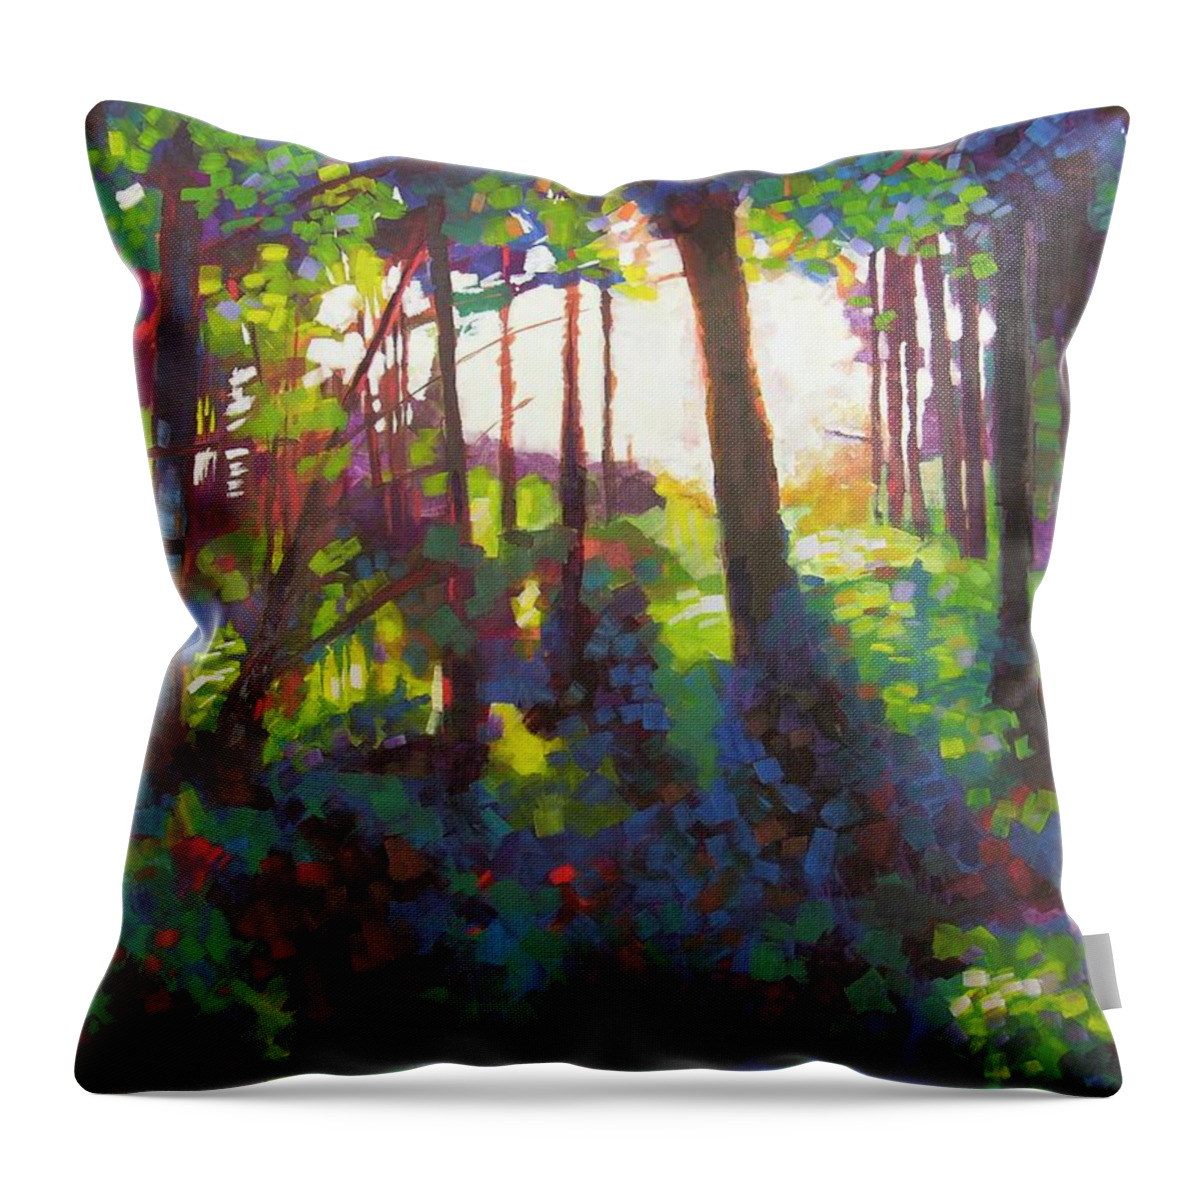 Landscape Throw Pillow featuring the painting Canopy by Mary McInnis